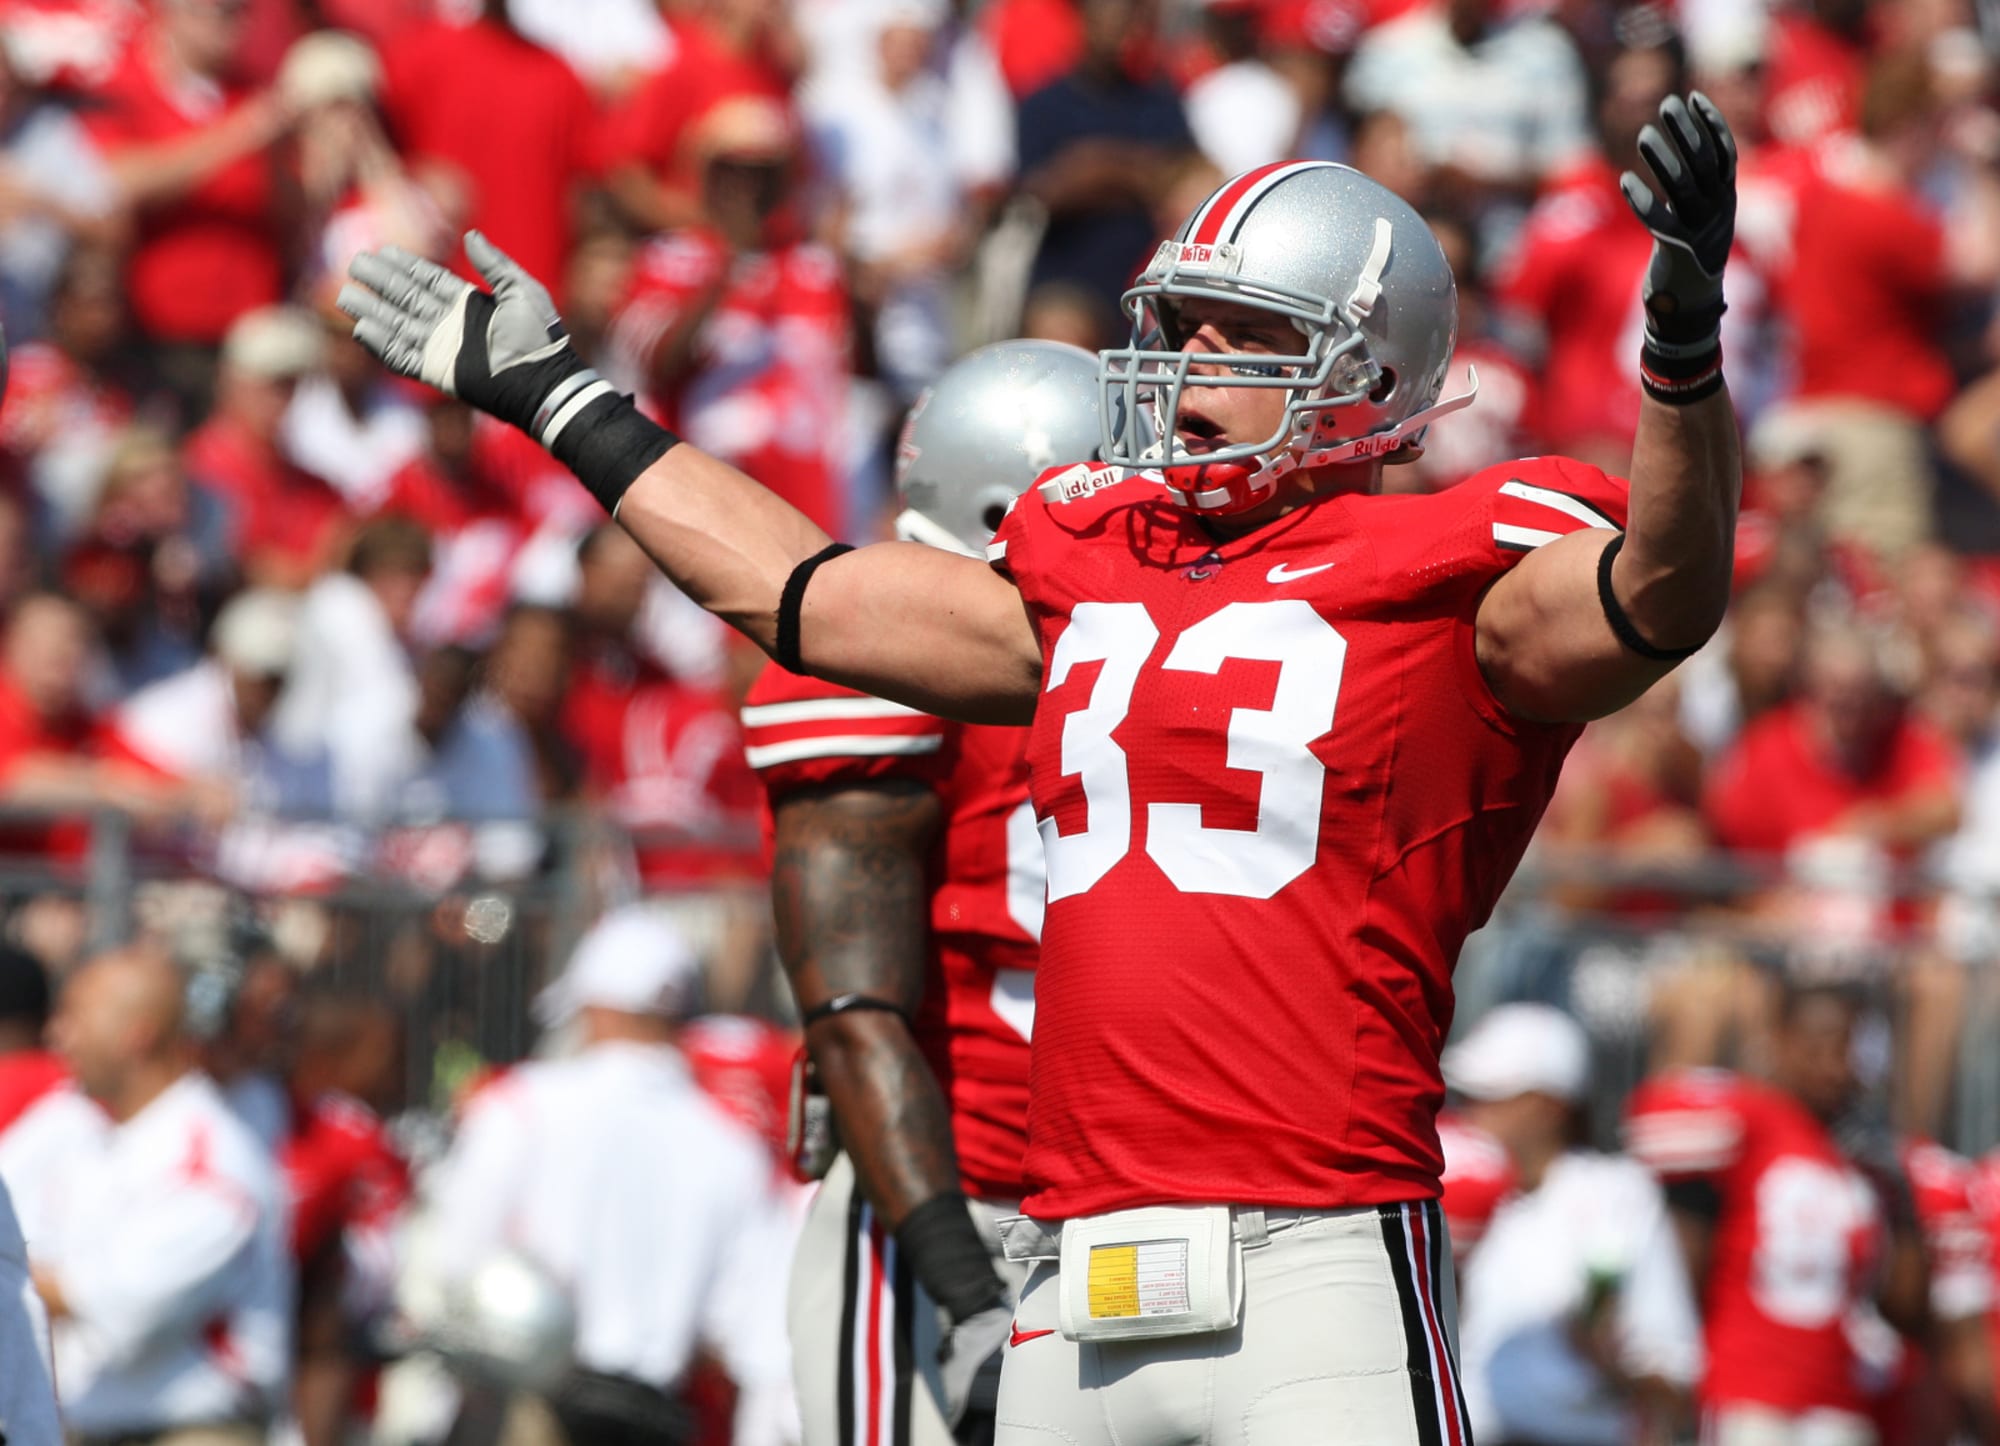 Five most underrated recruits in Ohio State Football history